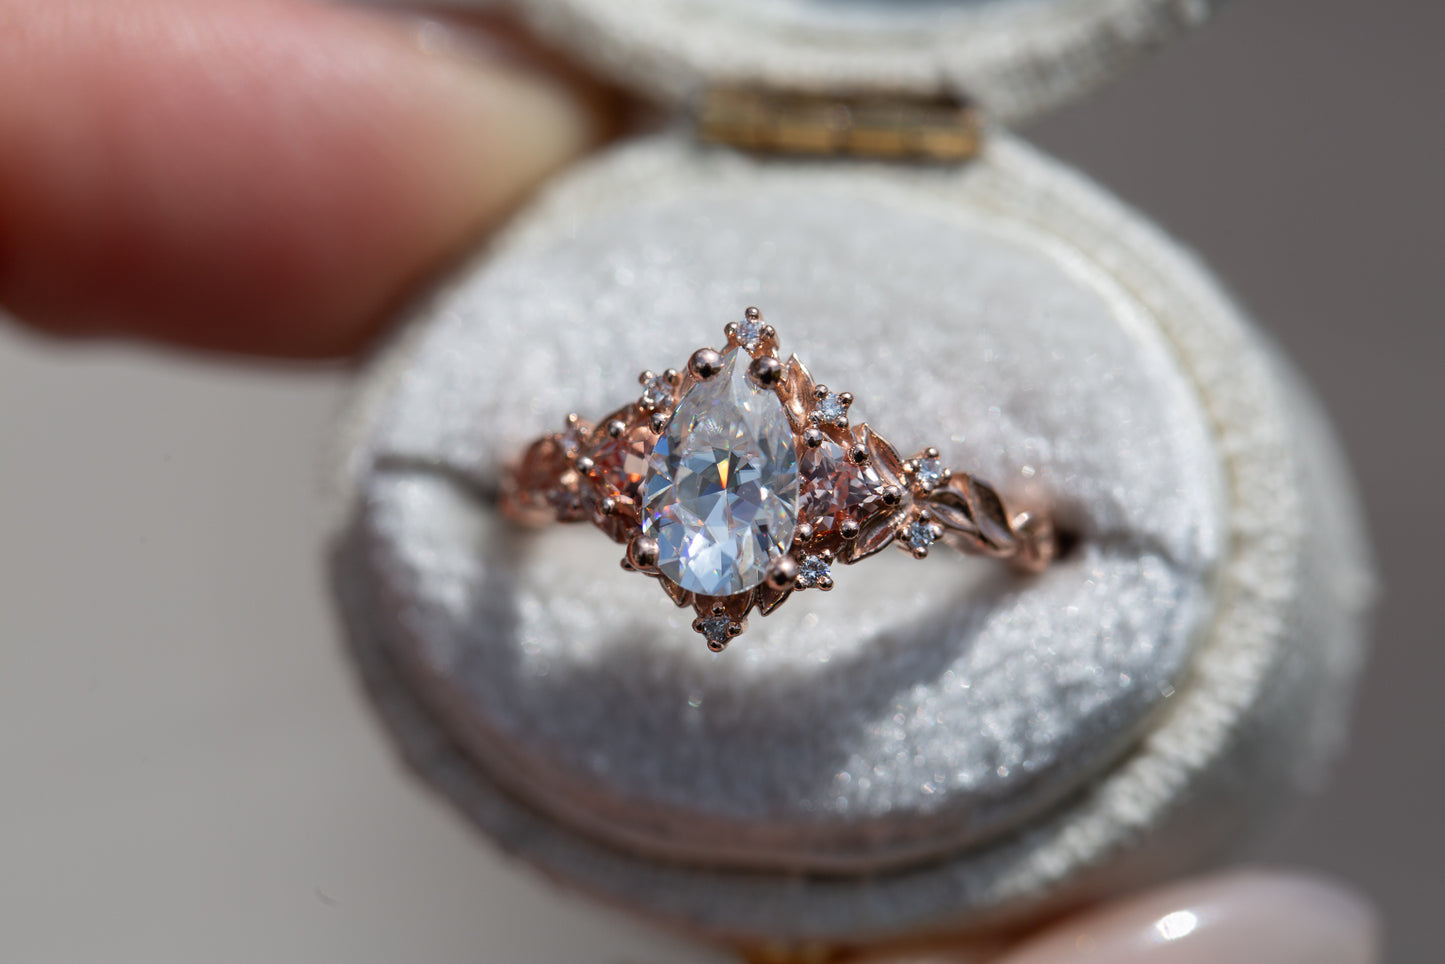 Briar rose three stone with 8x5mm pear moissanite center and lab peach sapphires